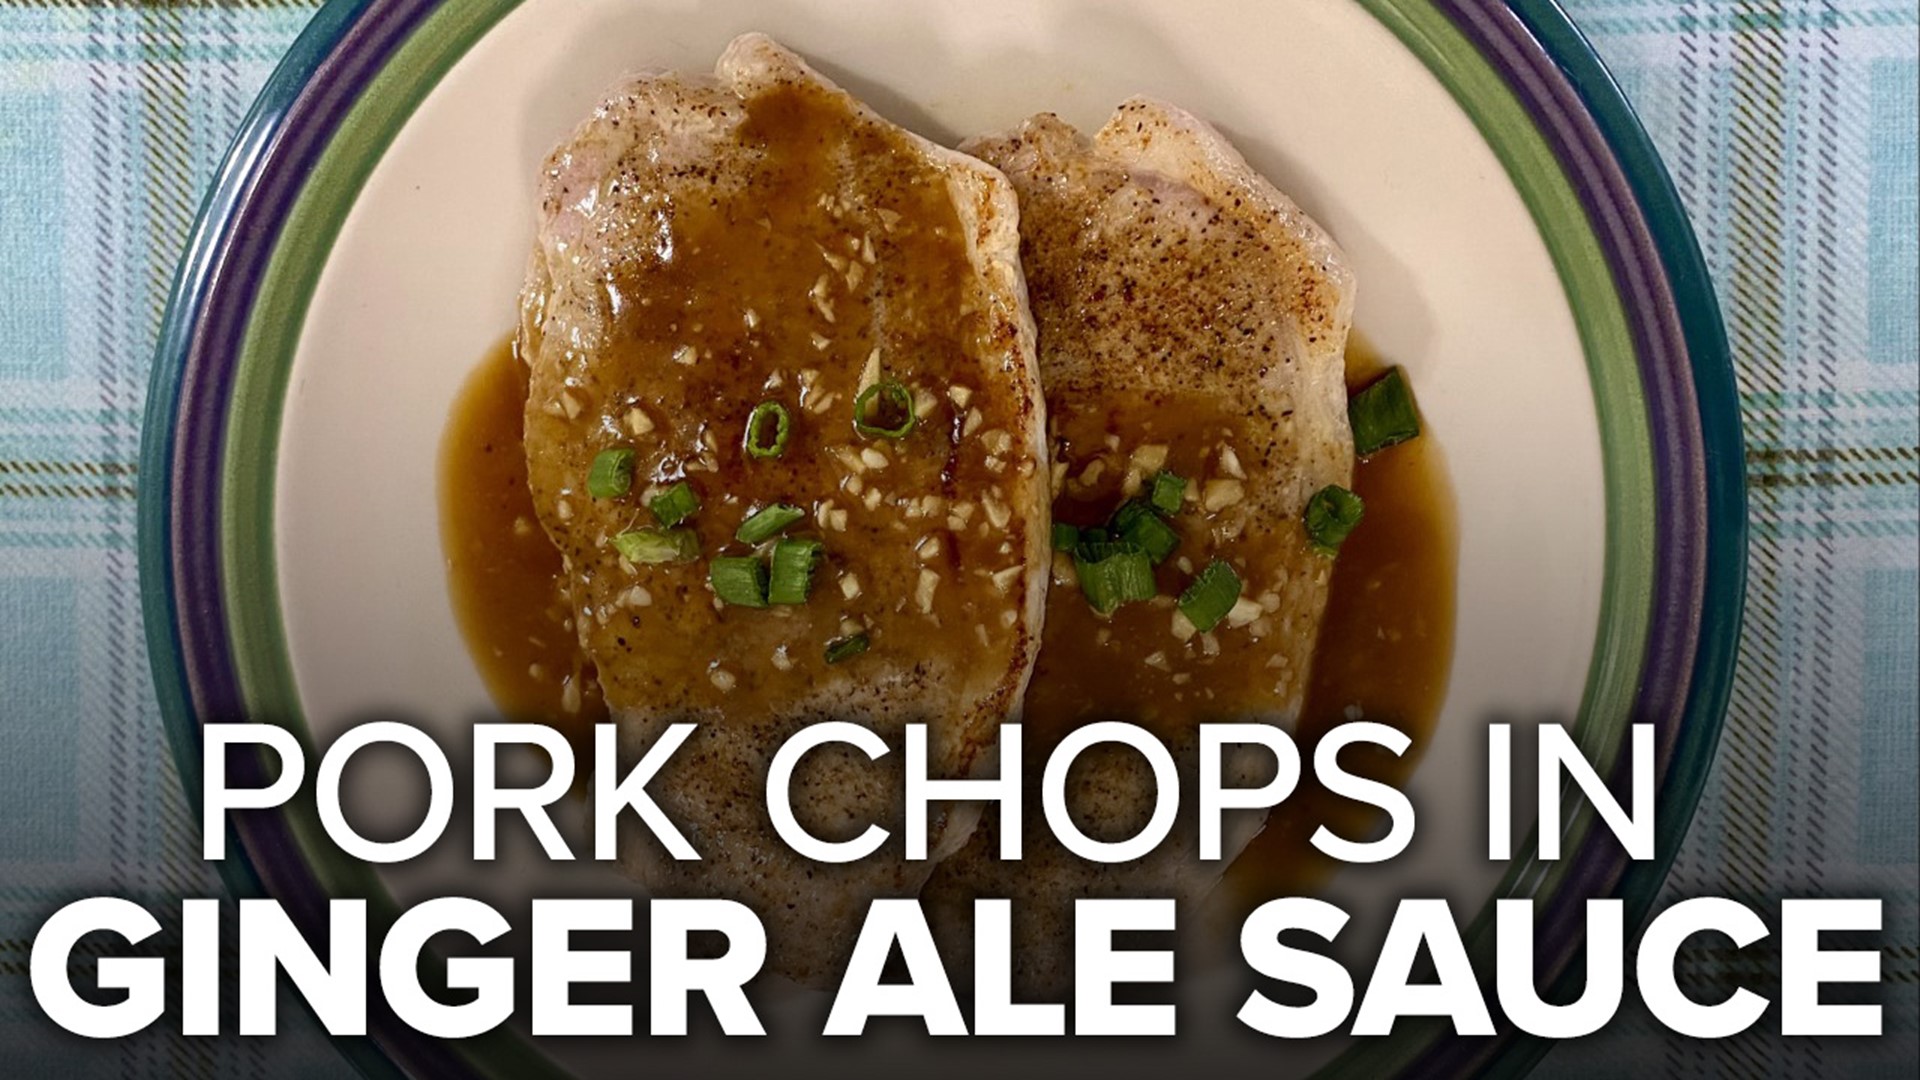 Instead of sipping on a nice ginger ale, why not cook with it?